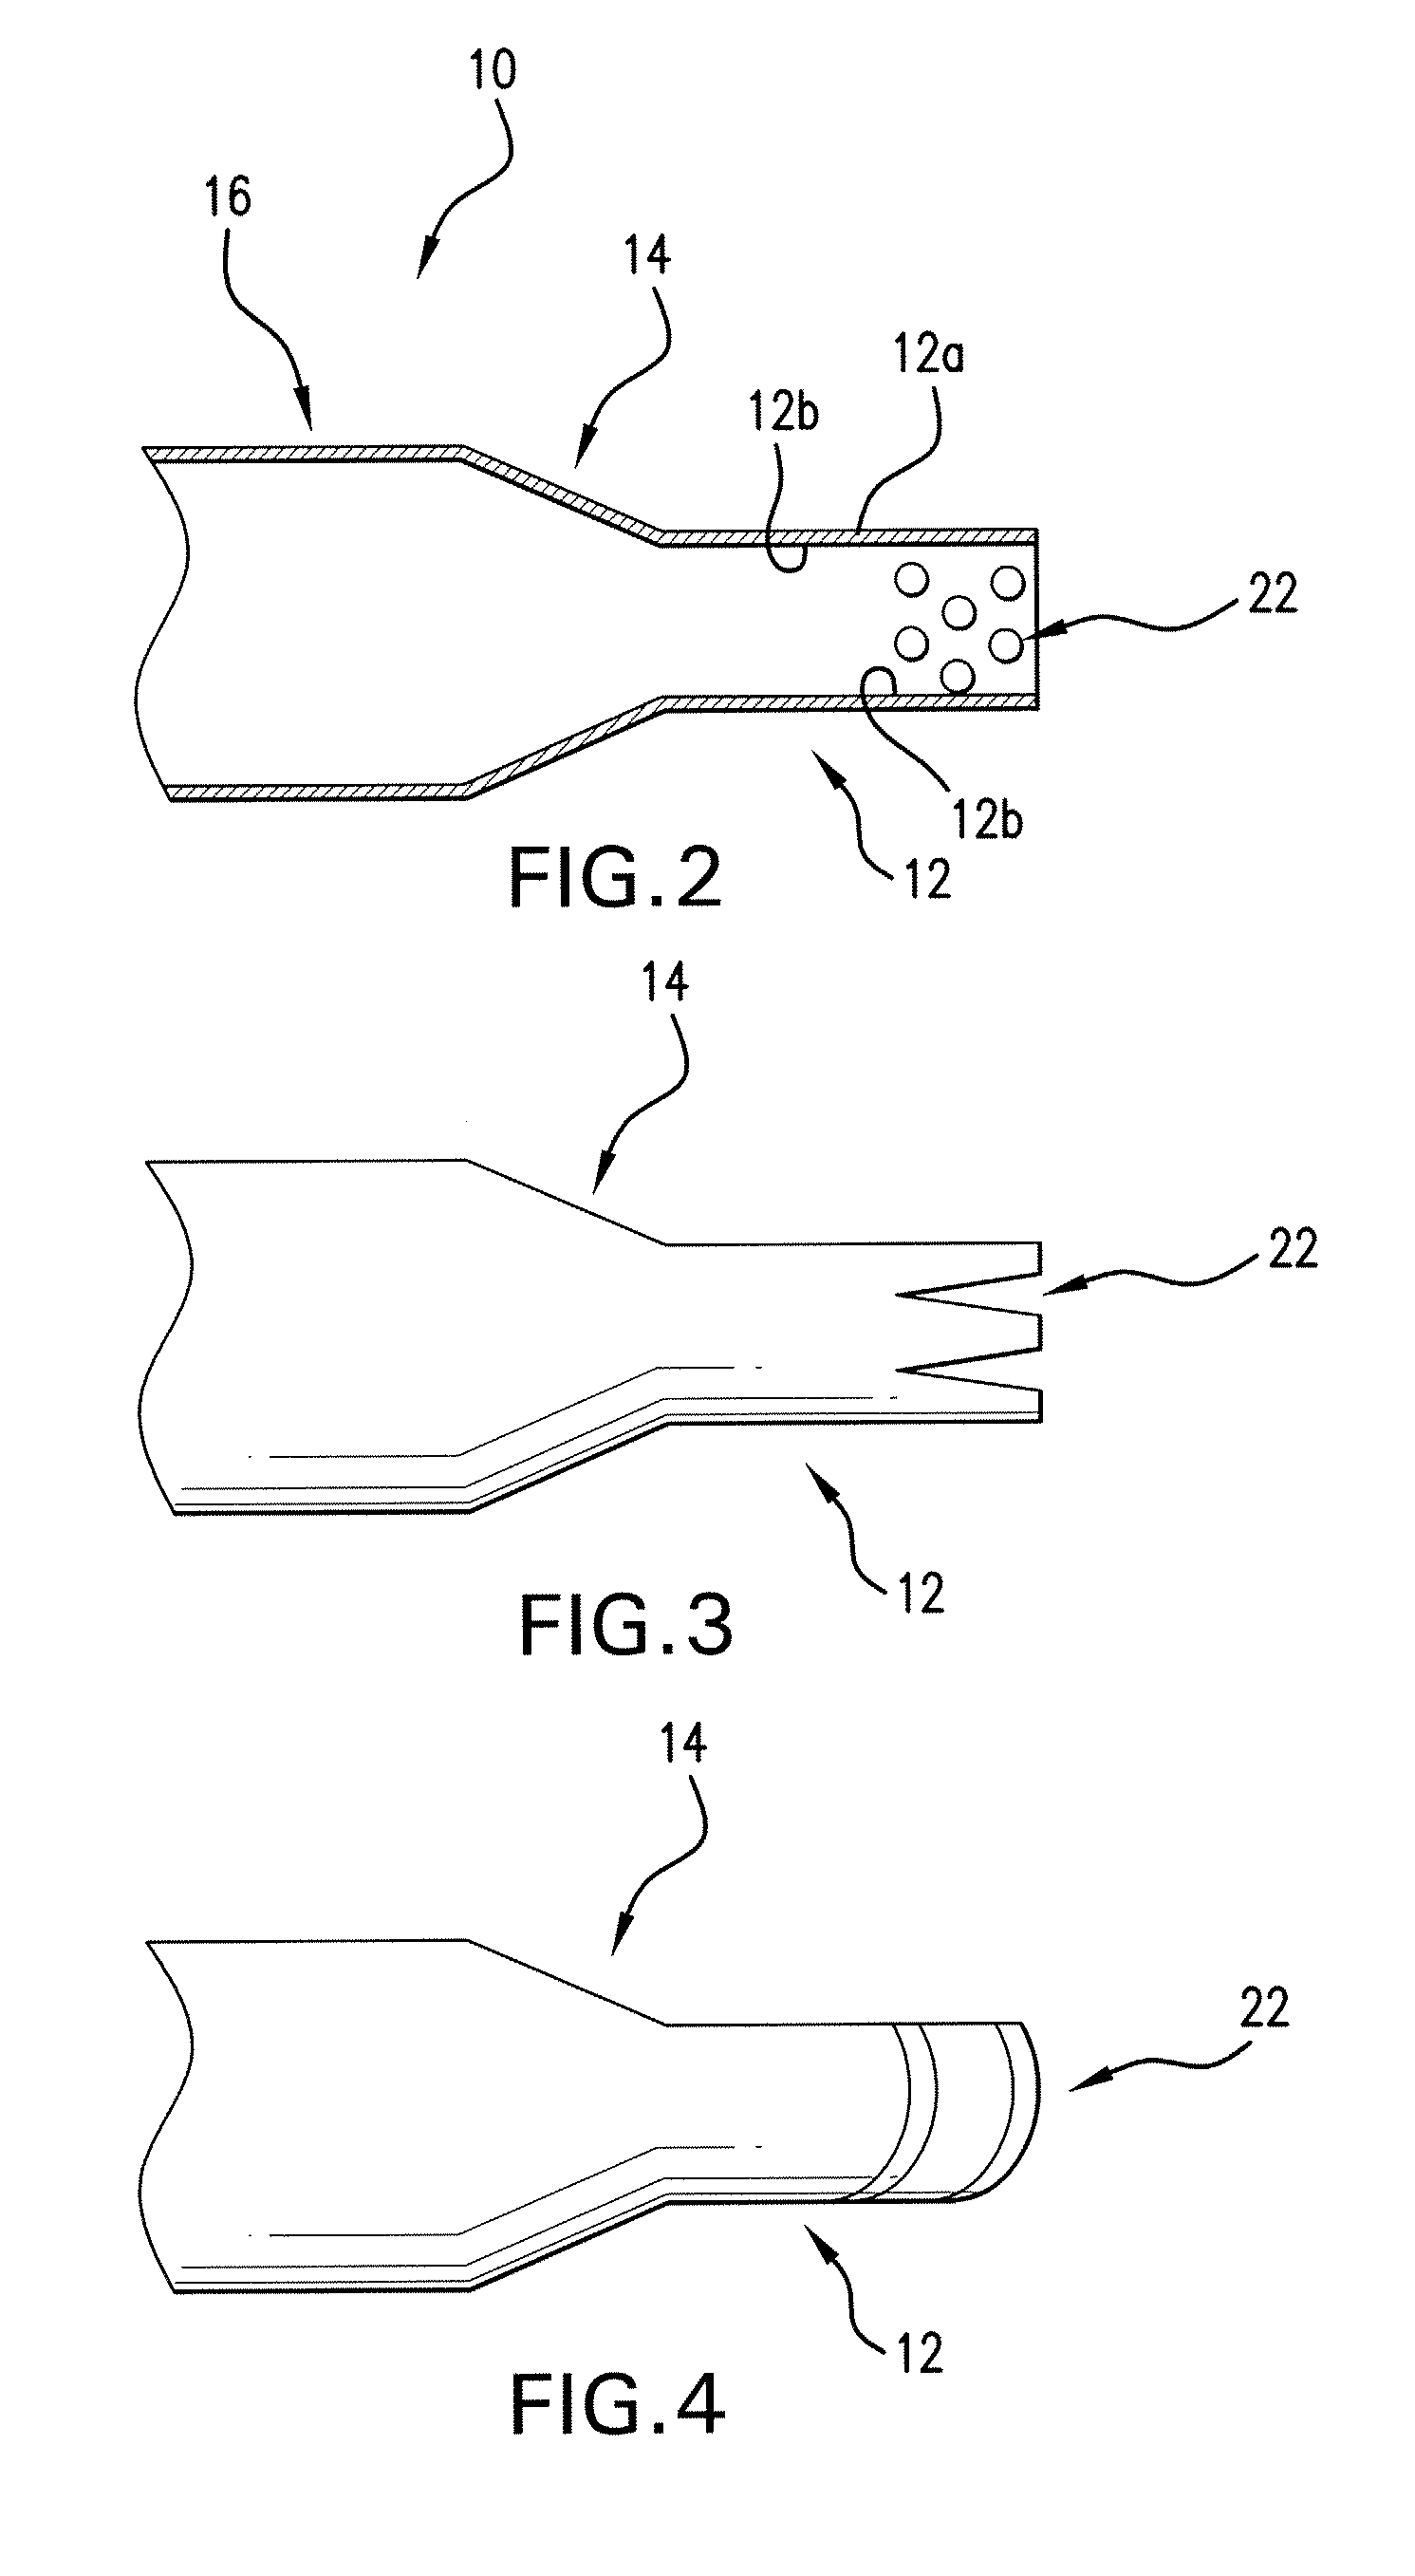 Method of reducing rigidity of angioplasty balloon sections